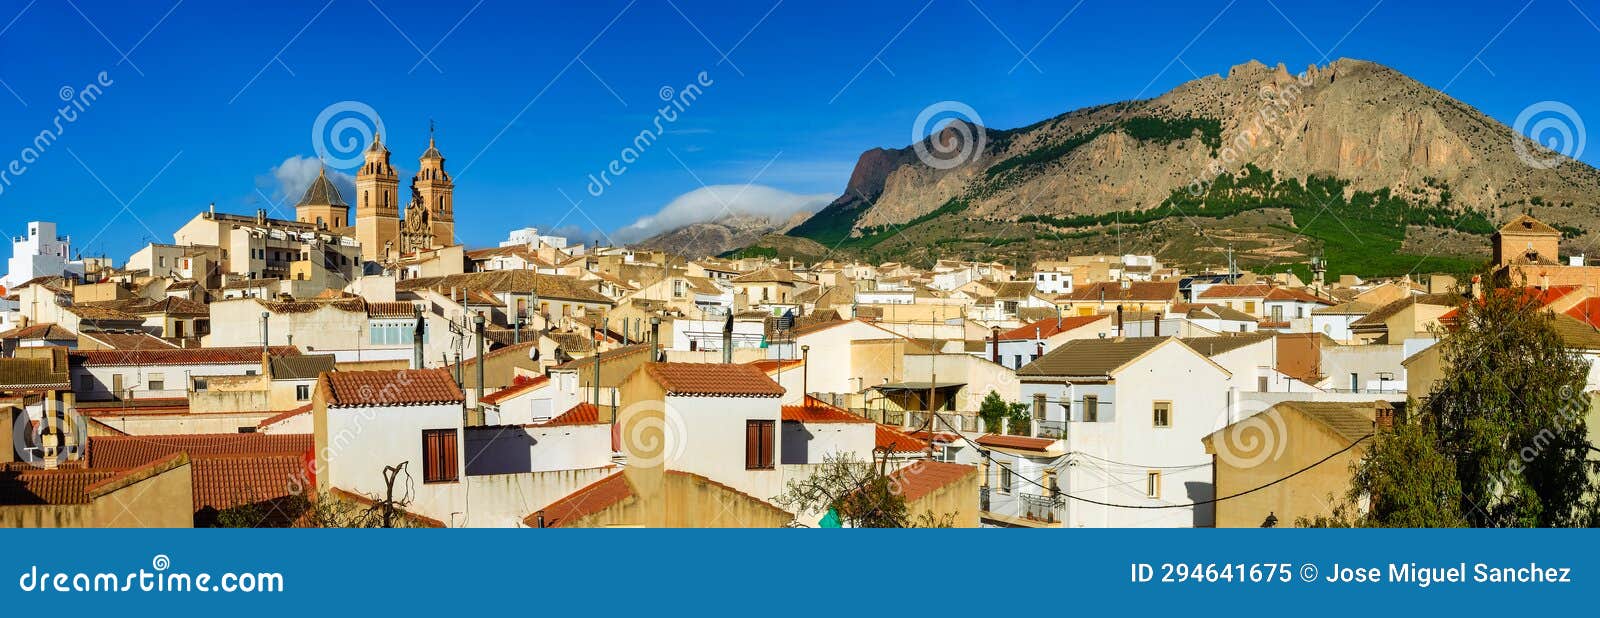 panoramic view of an andalusian village with its white houses and tall church towers, velez rubio, andalusia.